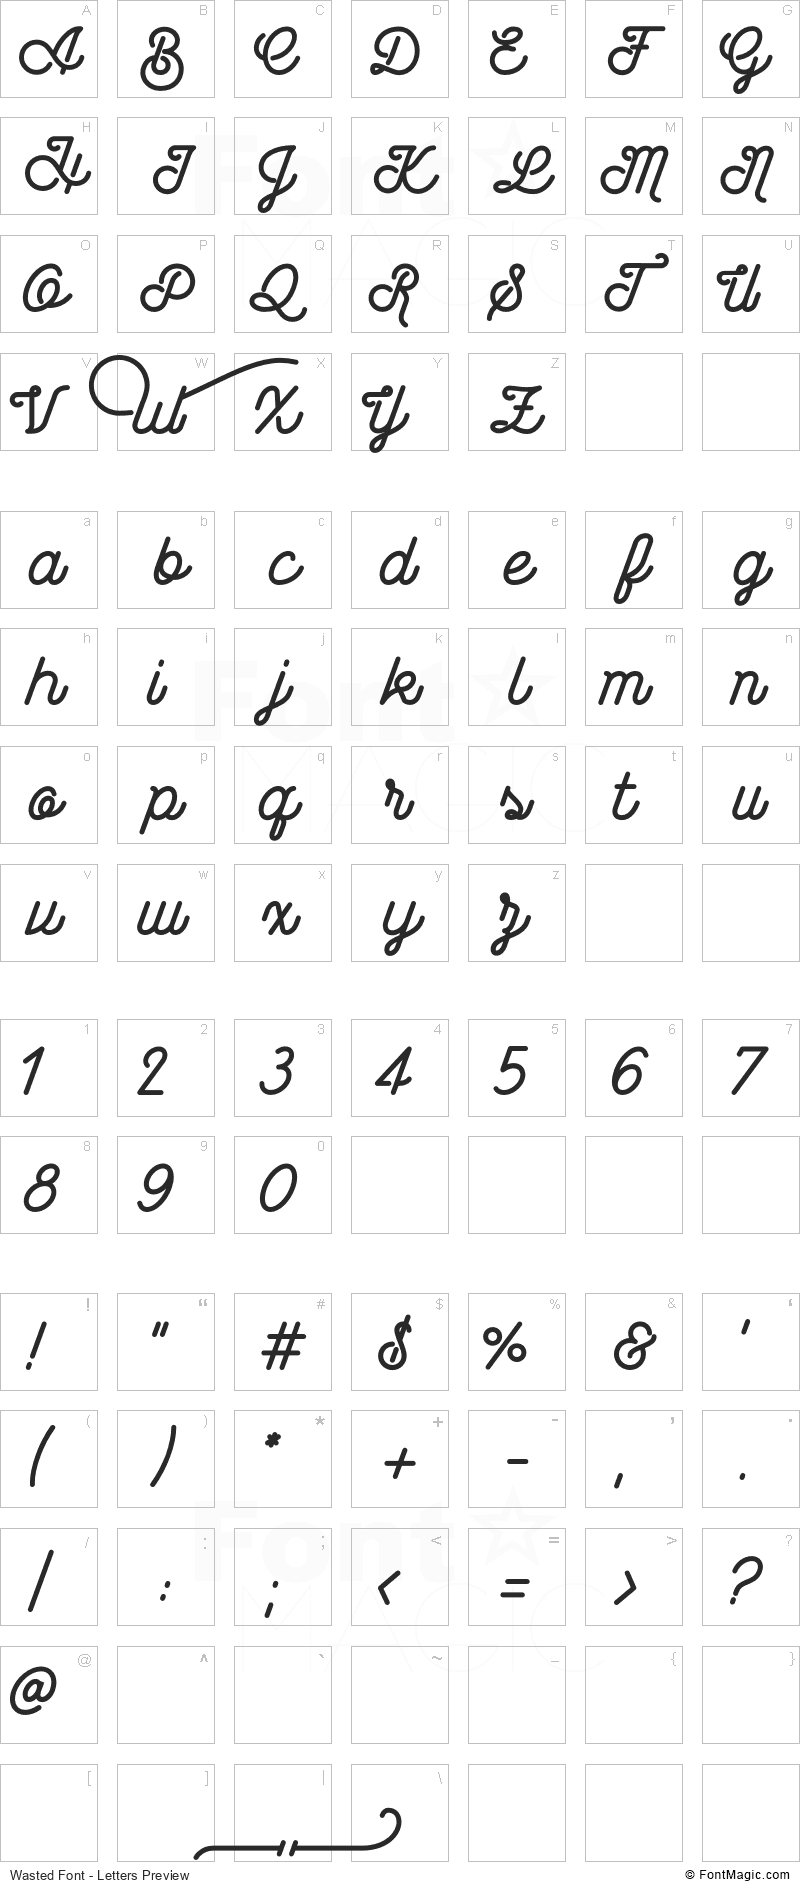 Wasted Font - All Latters Preview Chart